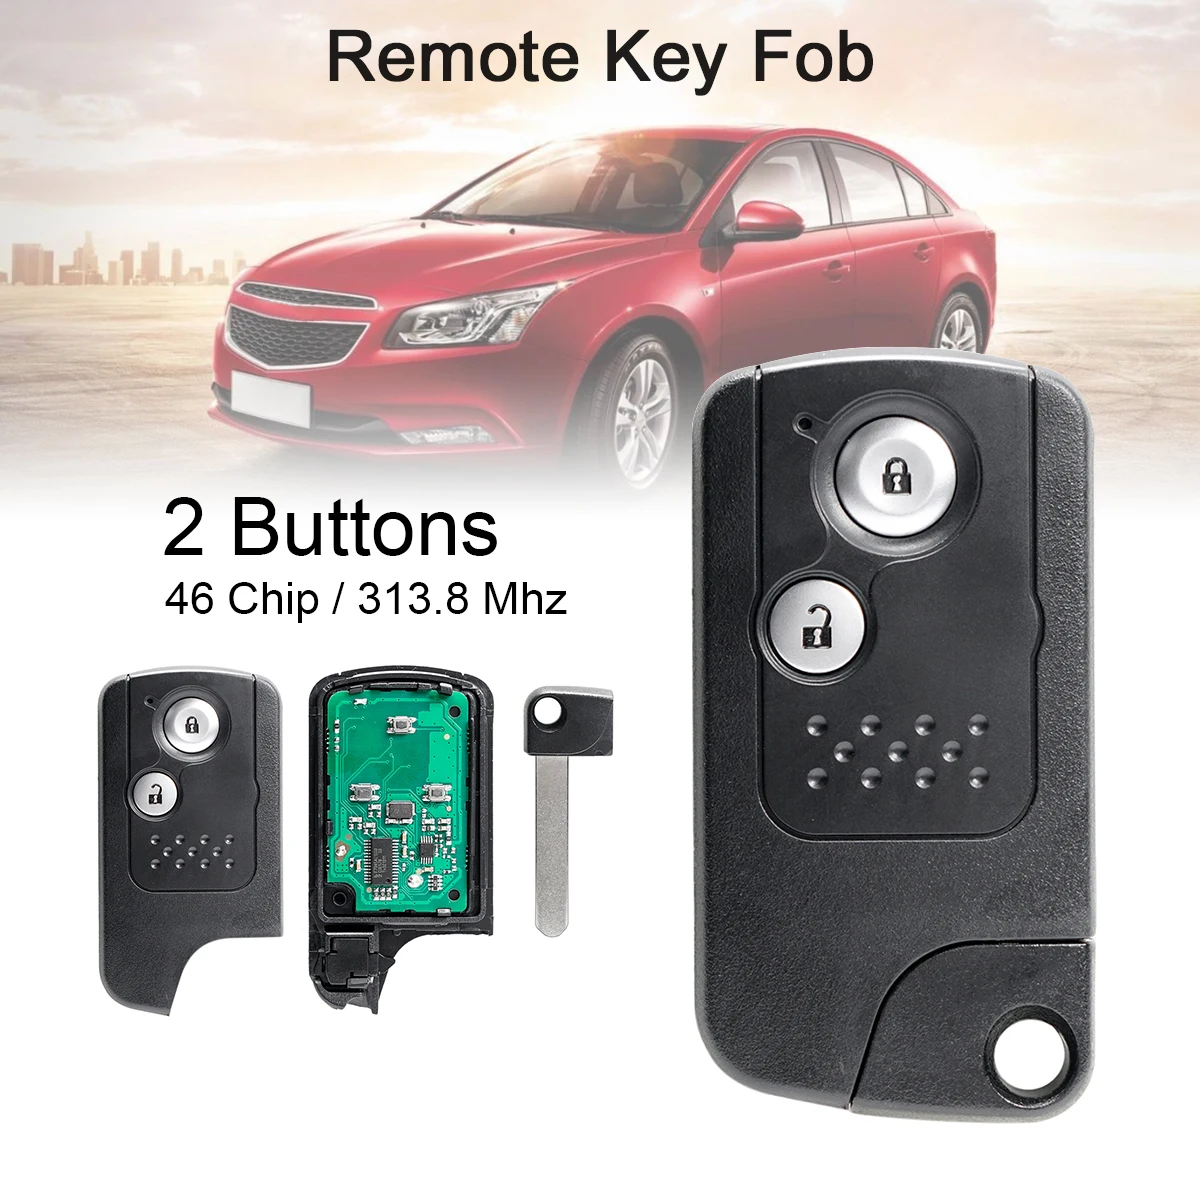 313.8Mhz 2 Buttons Full Smart Remote Key with ID46 / PCF7953 Chip Automobile Key Housing Replacement Auto Key for Honda CRV smart remote key for land rover freelander 2 keyless go smart remote control car key 315mhz 433 mhz with id46 chip pcf7953